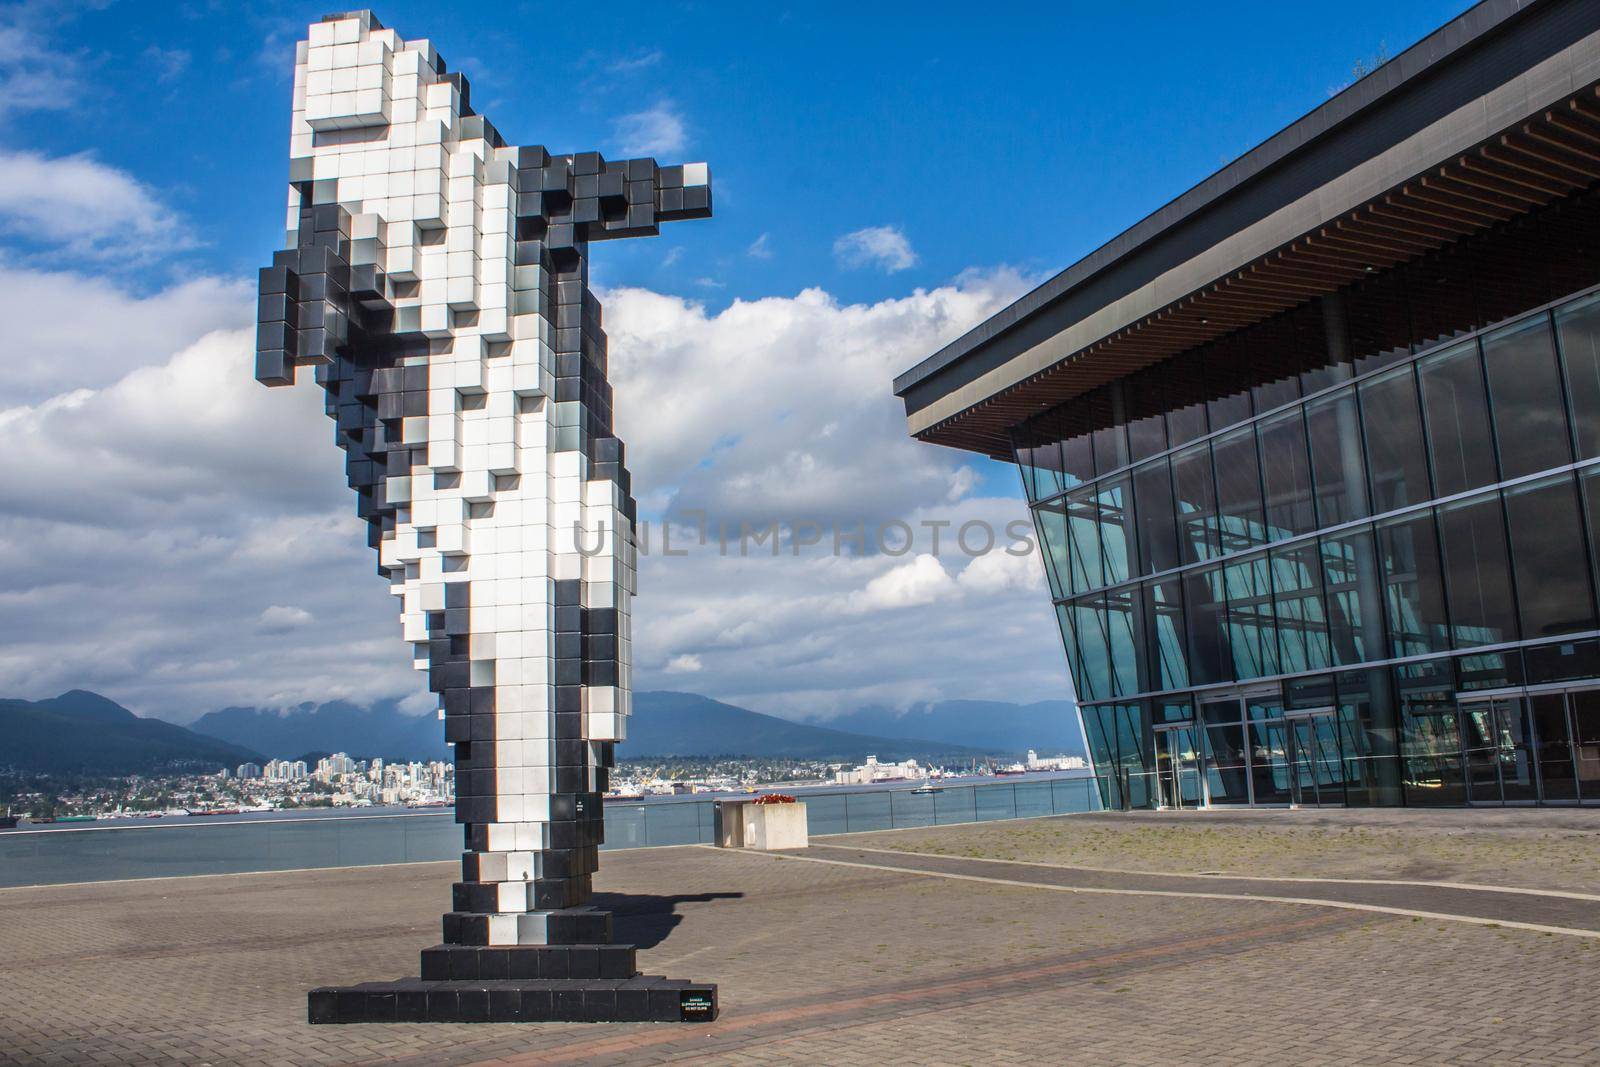 Vancouver, British Columbia, Canada September 2, 2020 . The aluminium sculpture Digital Orca of a Orca whale by the artist Douglas Coupland, installed next to Convention Centre in Vancouver. by JuliaDorian